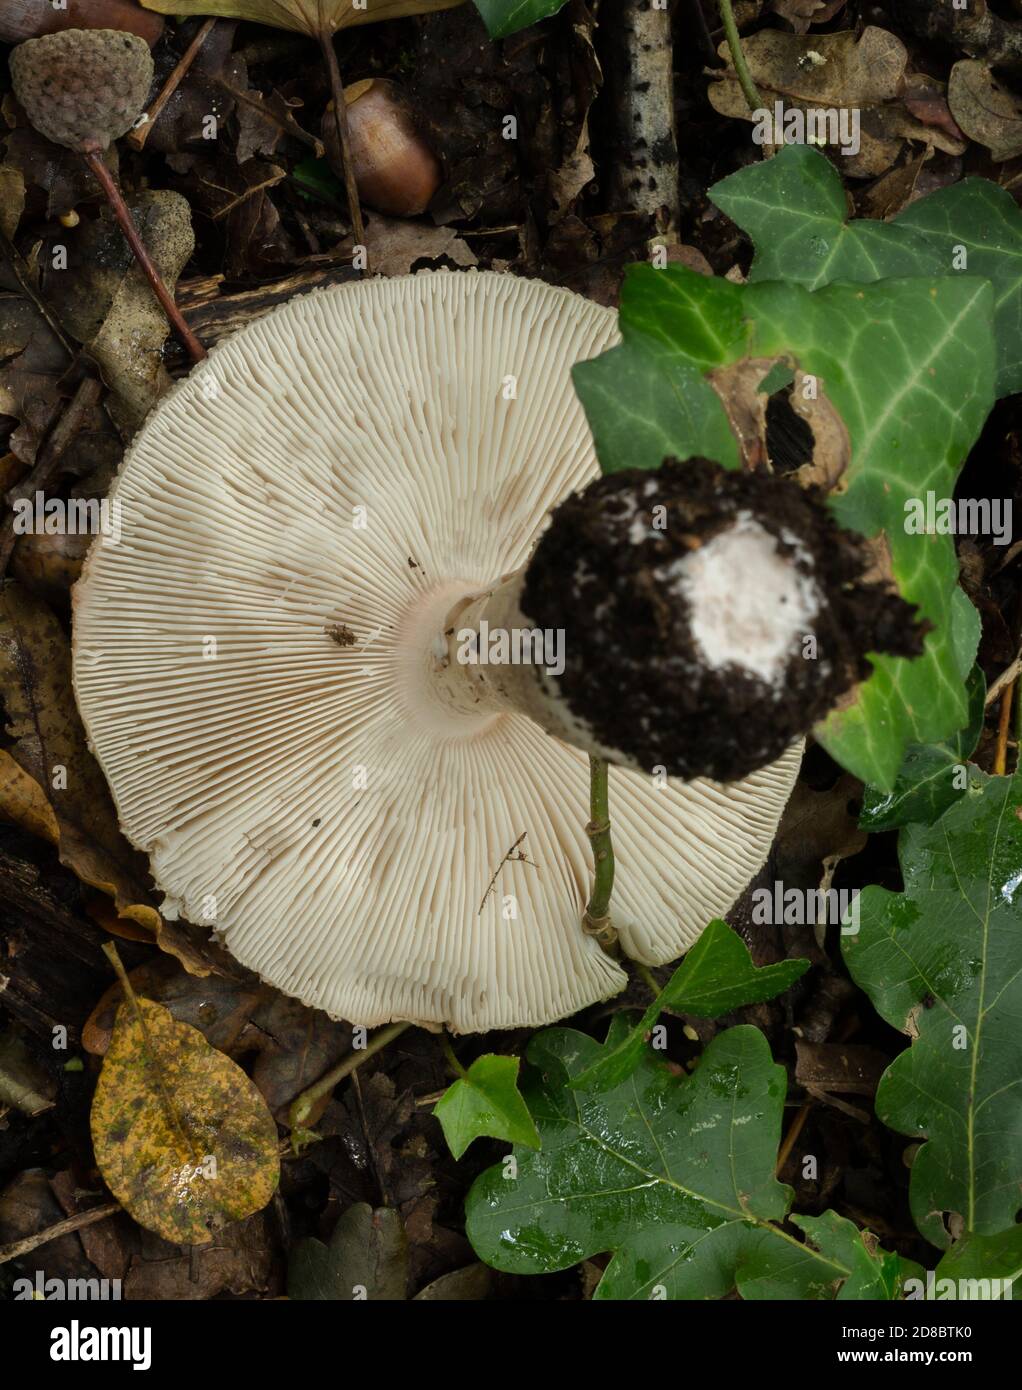 View of the gills of the freckled dapperling. This example was found in October France woodland. Stock Photo